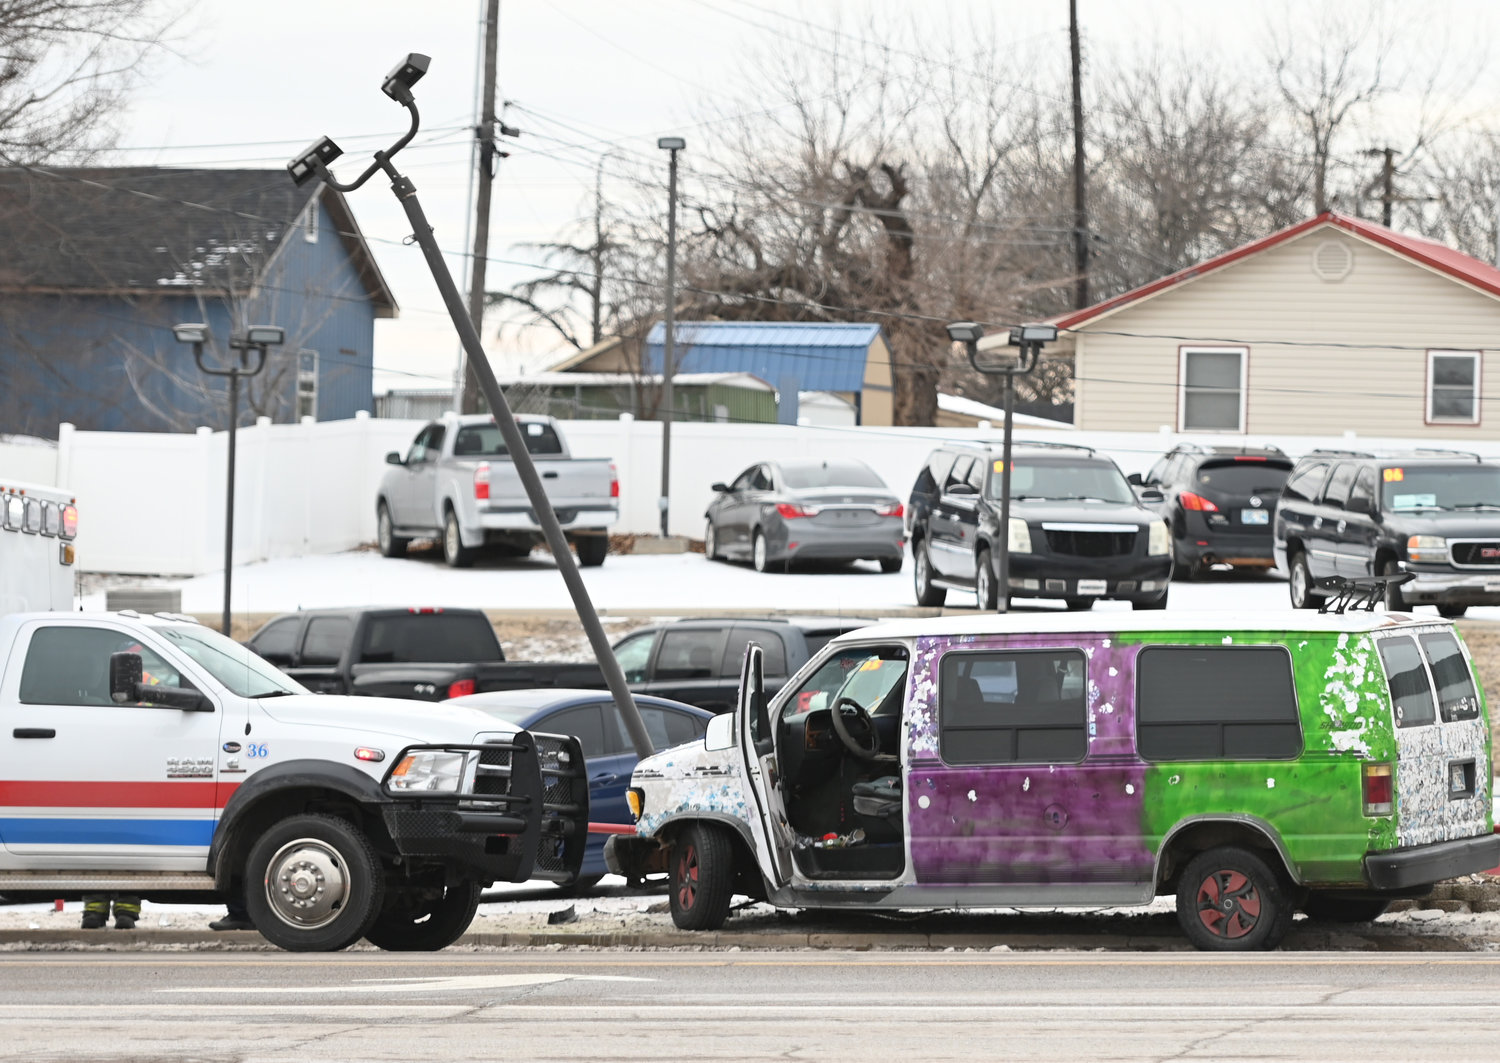 Mother Nature unloaded a layer of ice on Central Oklahoma Monday and Tuesday, resulting in less-than-ideal driving conditions for motorists. This van struck a light pole Tuesday afternoon at S&S Motors.